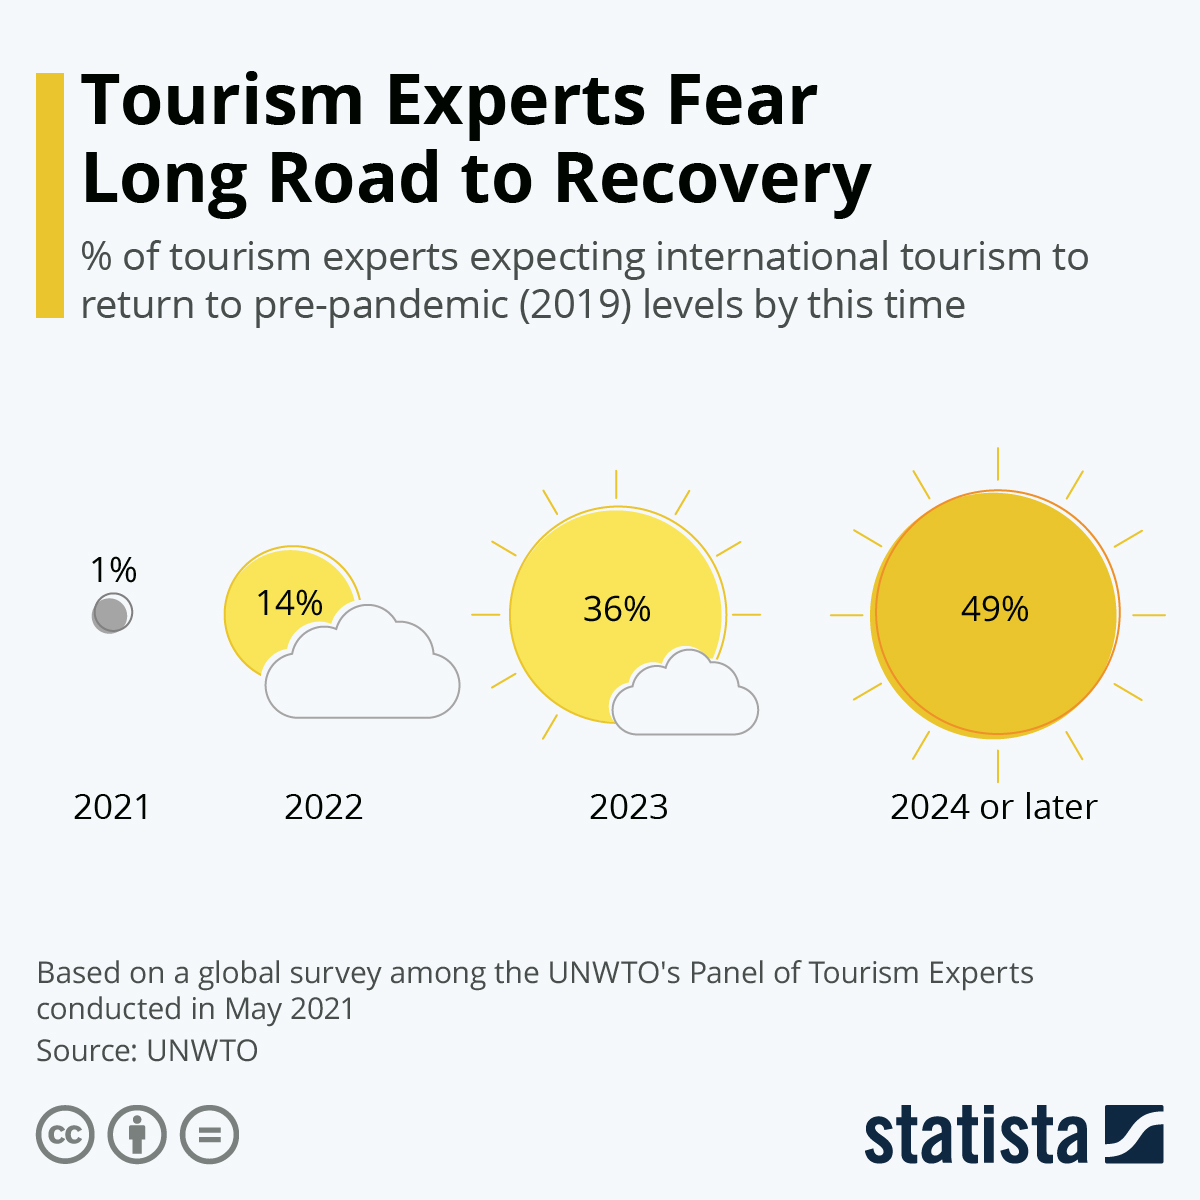 Tourism Experts Fear Long Road to Recovery